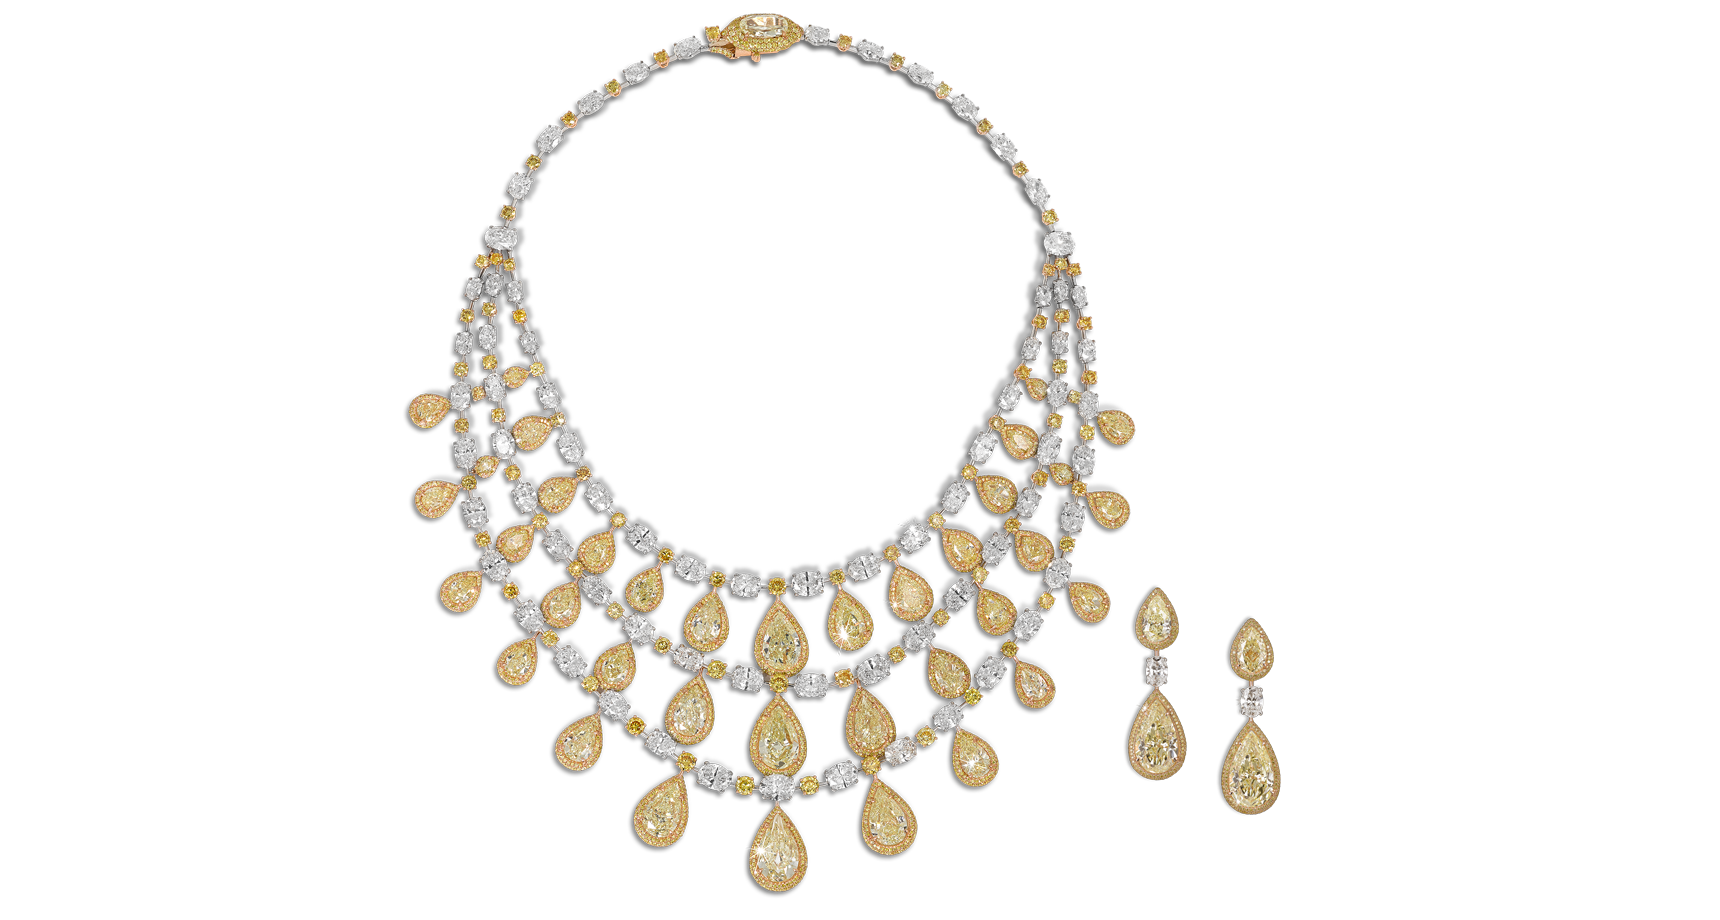 Yellow pear shape diamond necklace with white marquise and pear cut diamonds